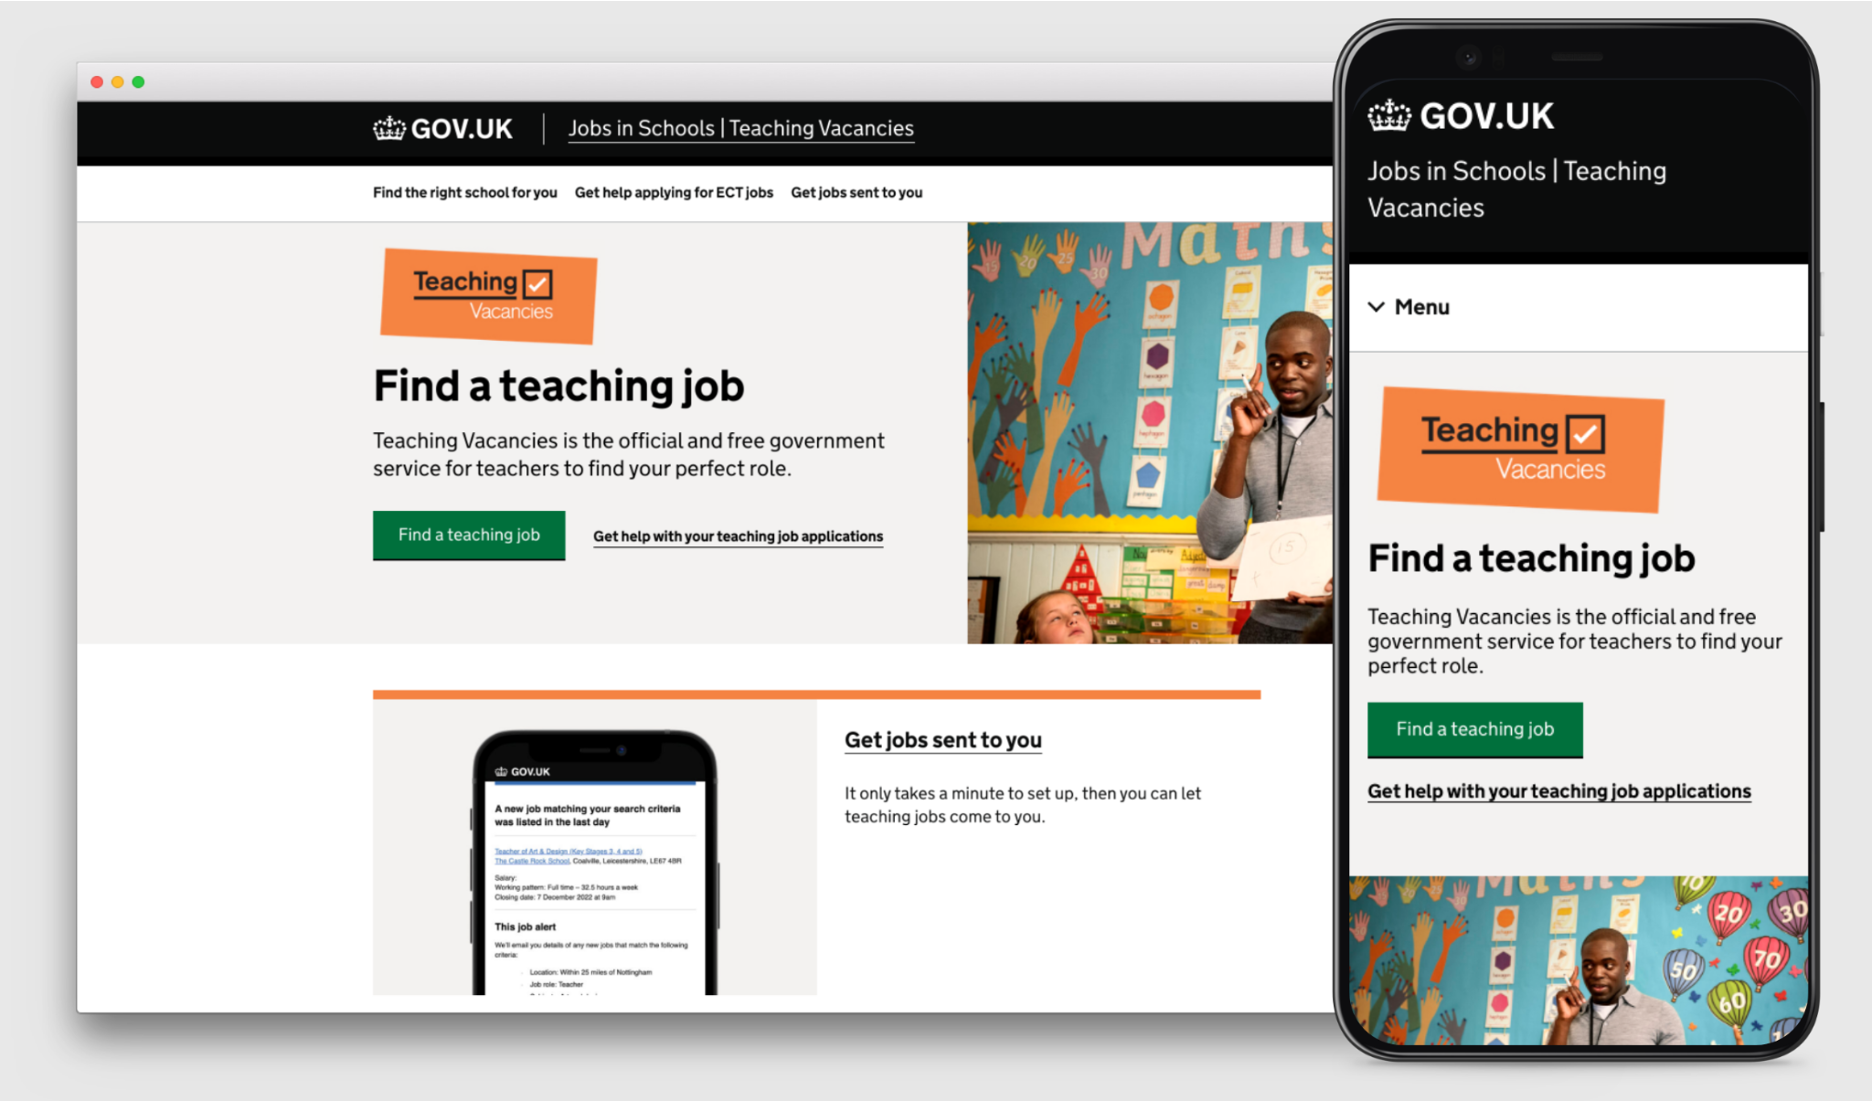 A desktop and mobile mockup of the homepage of the campaign site we built to help trainee teachers find their first job.